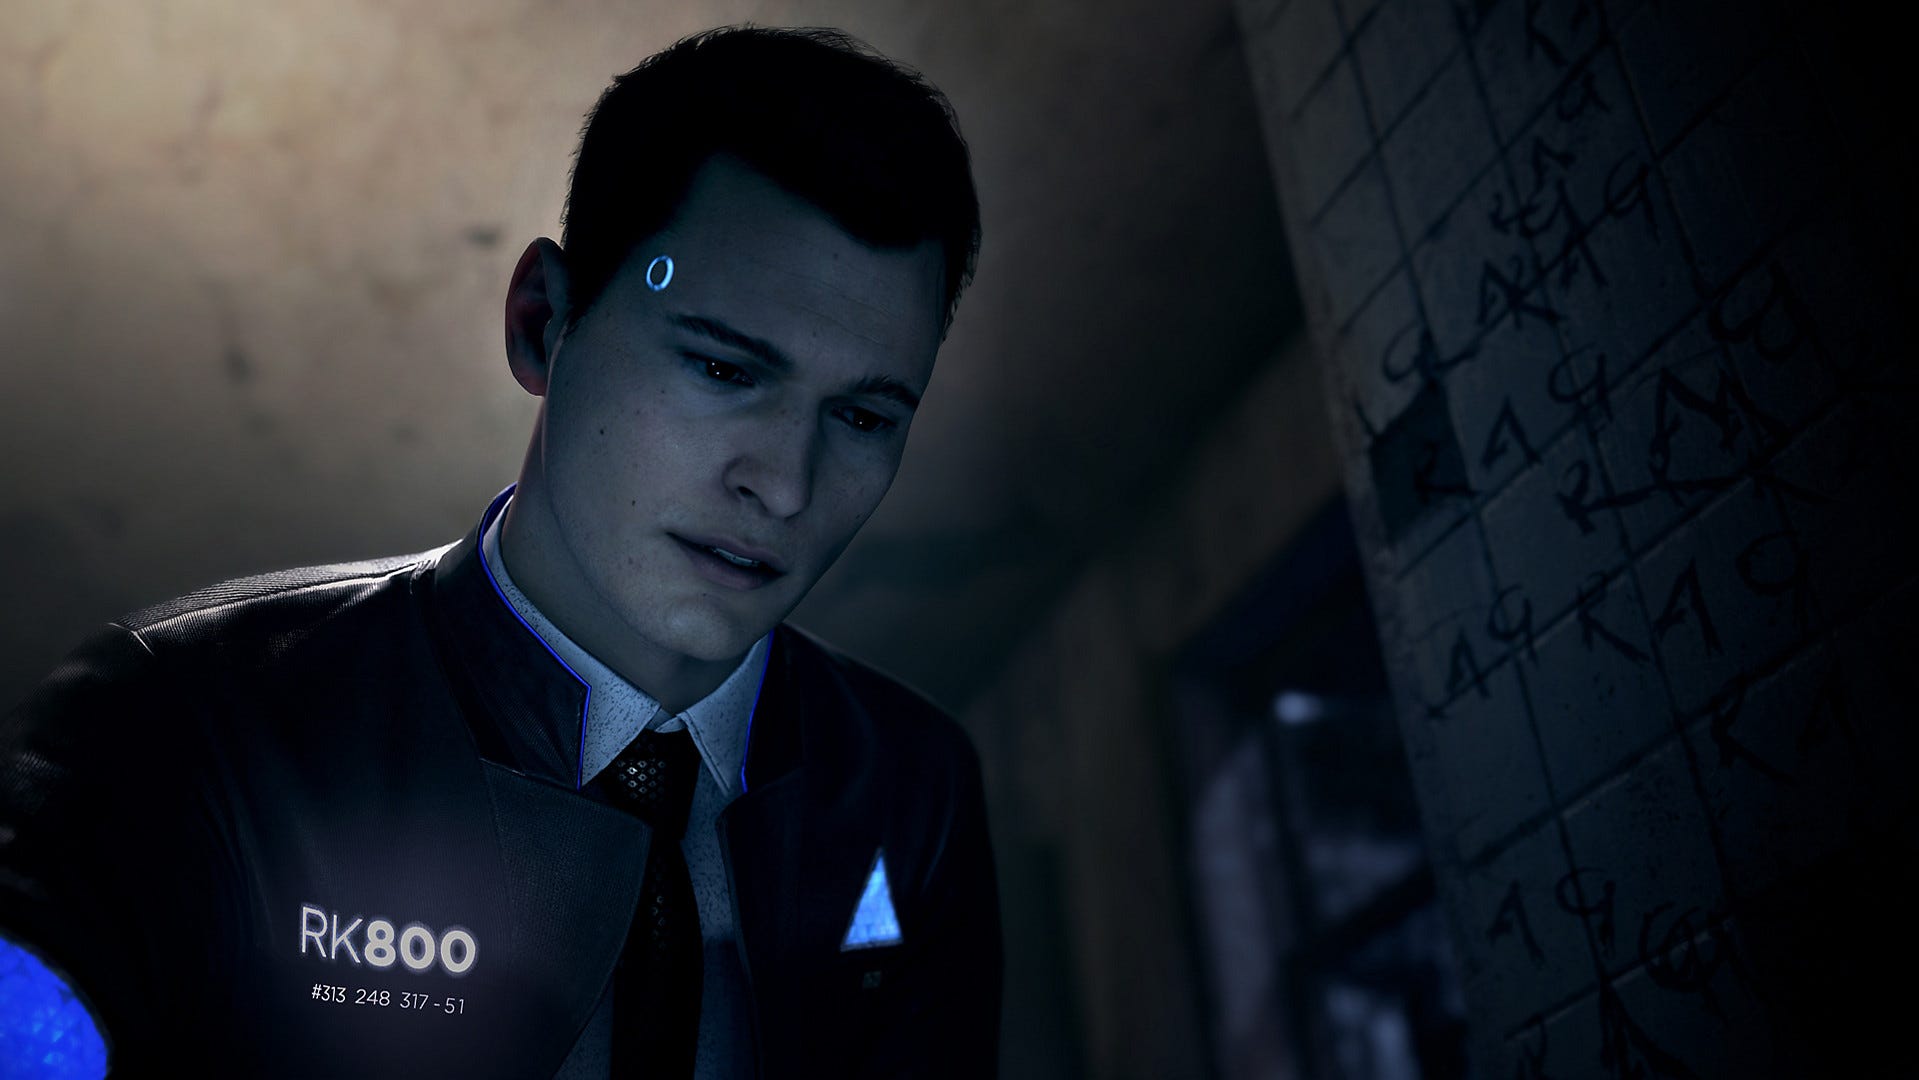 Detroit: Become Human Review - An Intriguing, But Flawed, Future - Game  Informer